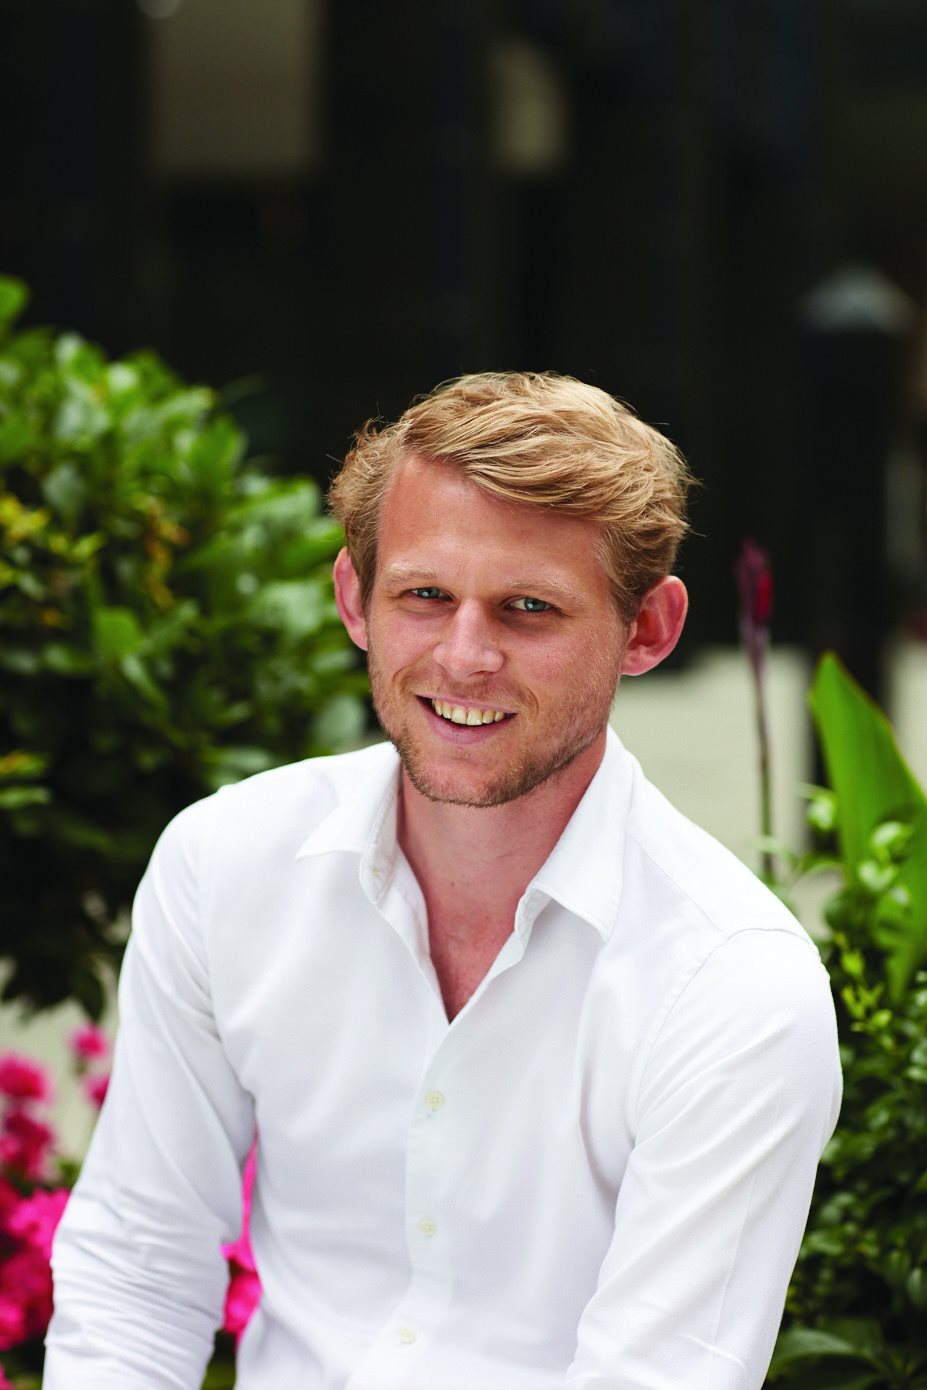 Angus Berry, group sustainability graduate and Connecting Clubs charity founder